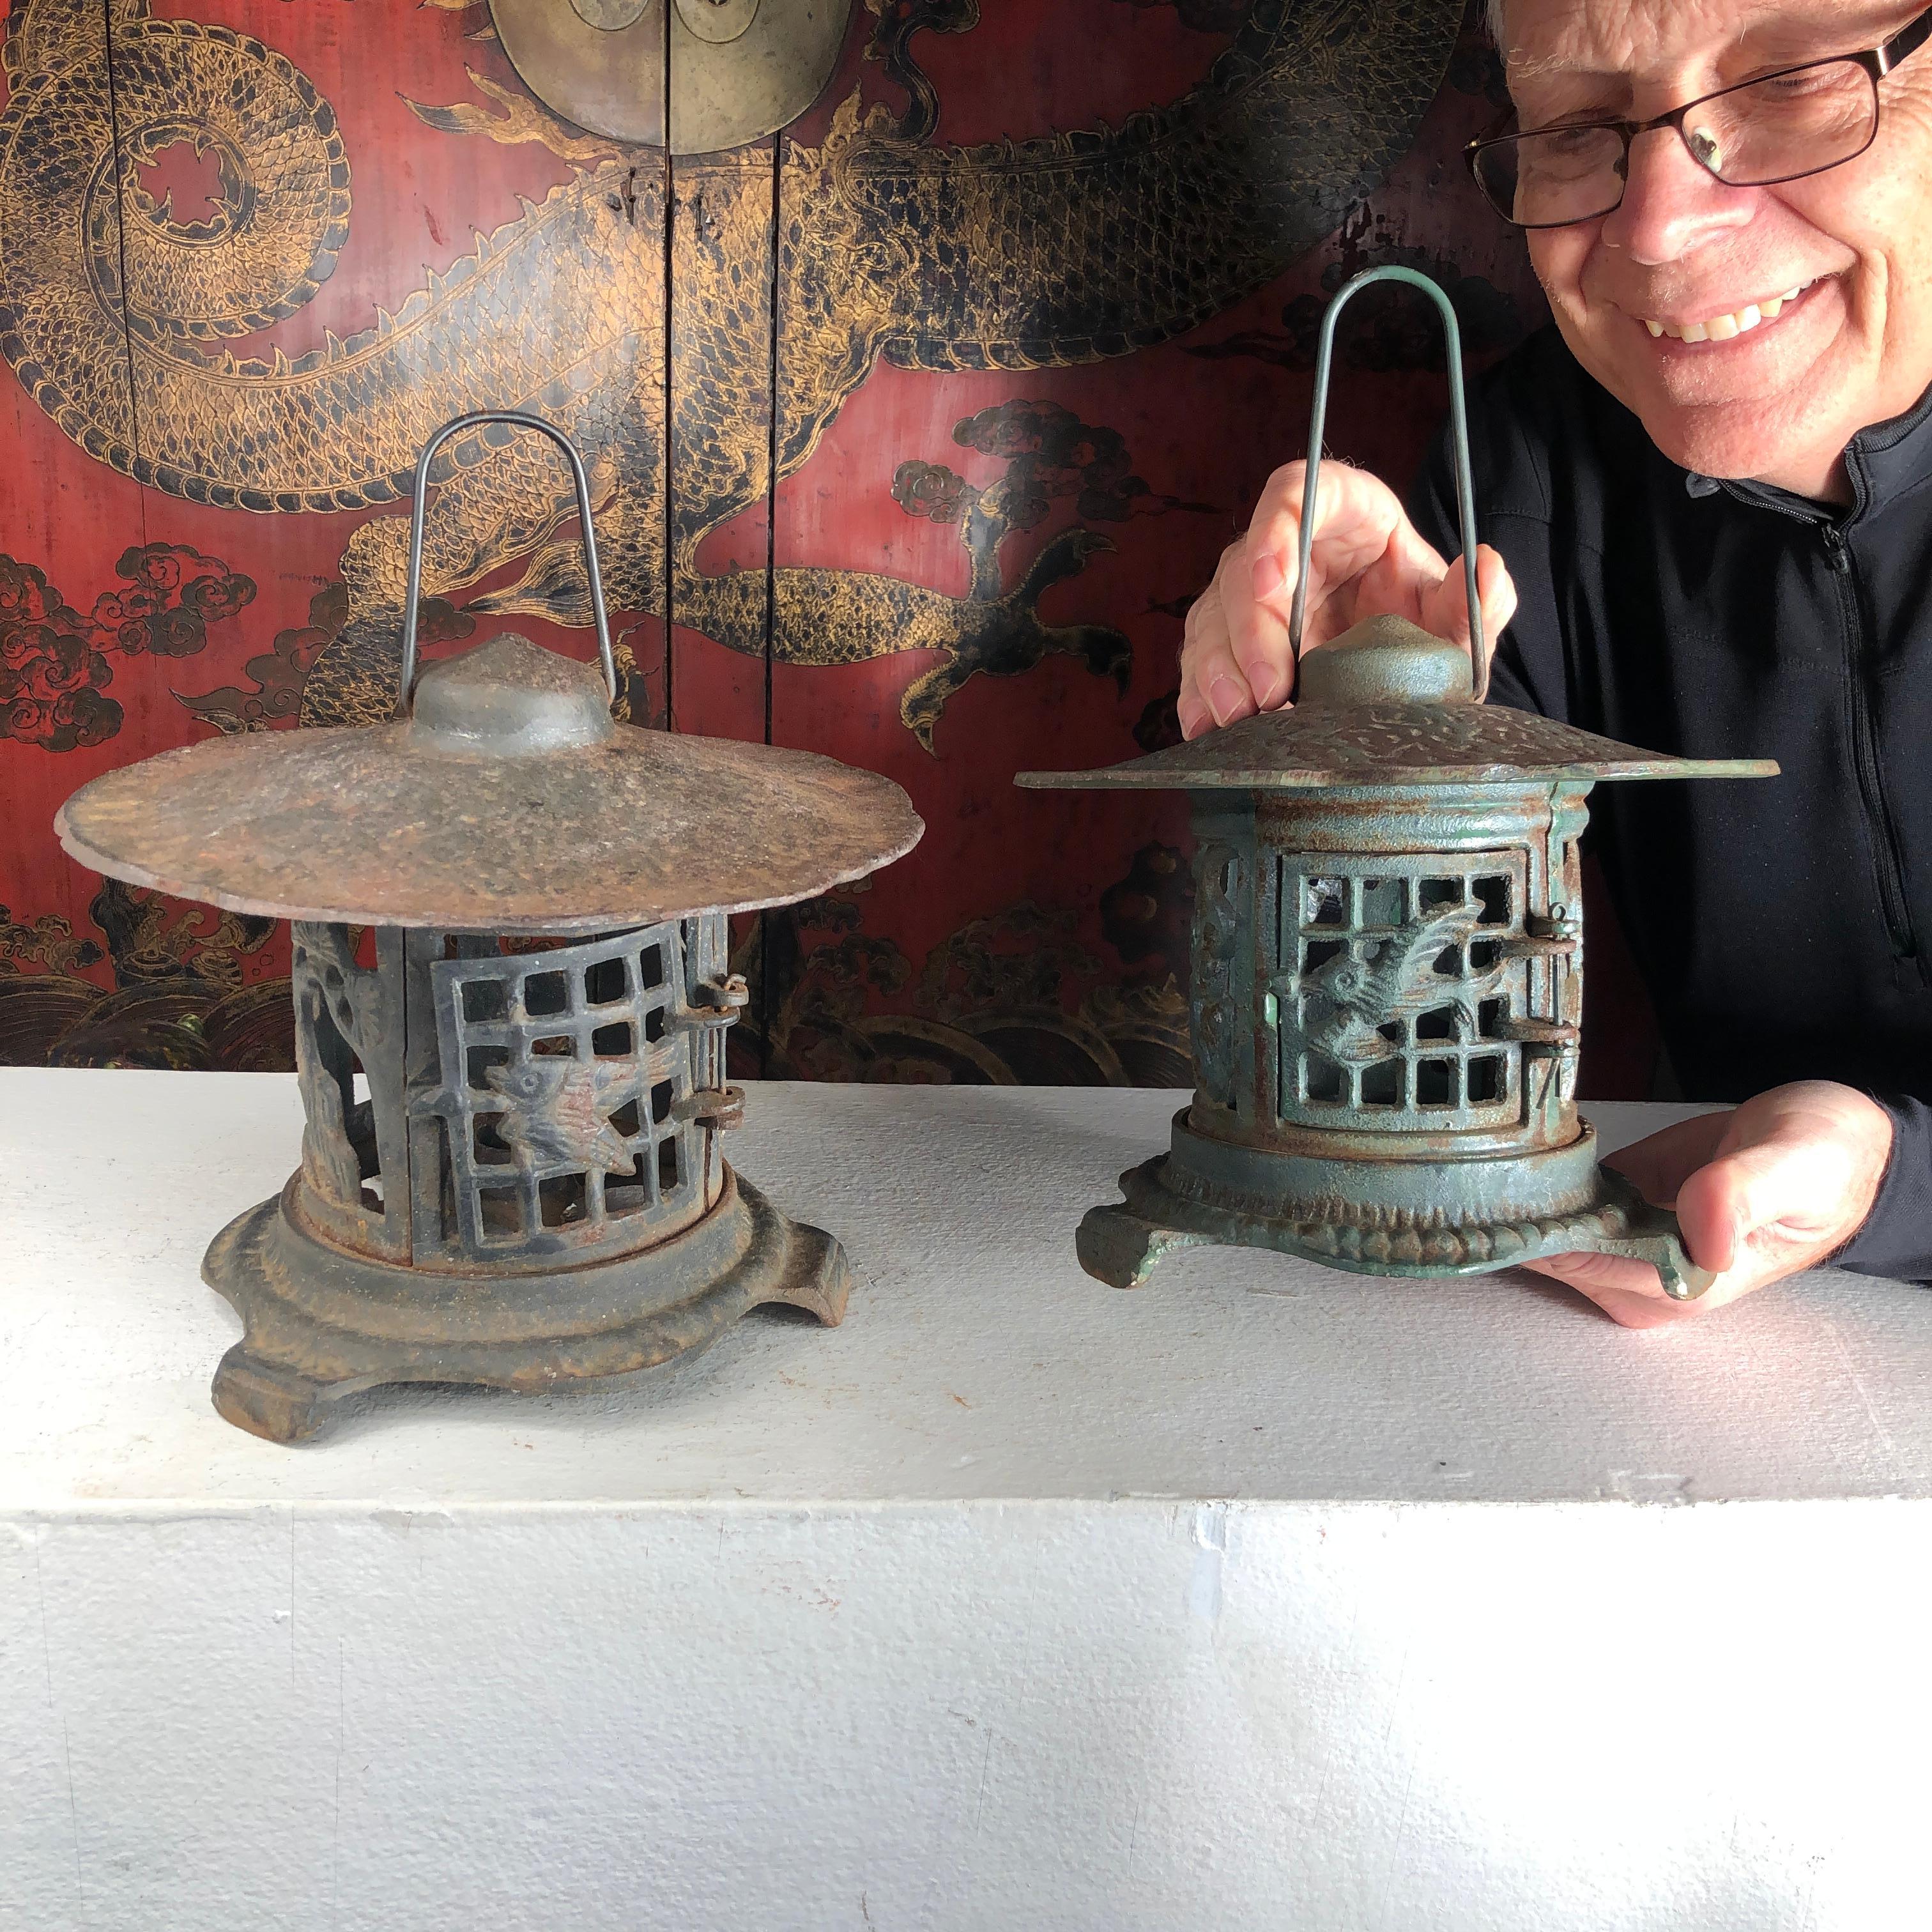 Fine pair

From our recent Japanese travels in original as found condition

Japan, an elegant pair (2) of antique lanterns, with 